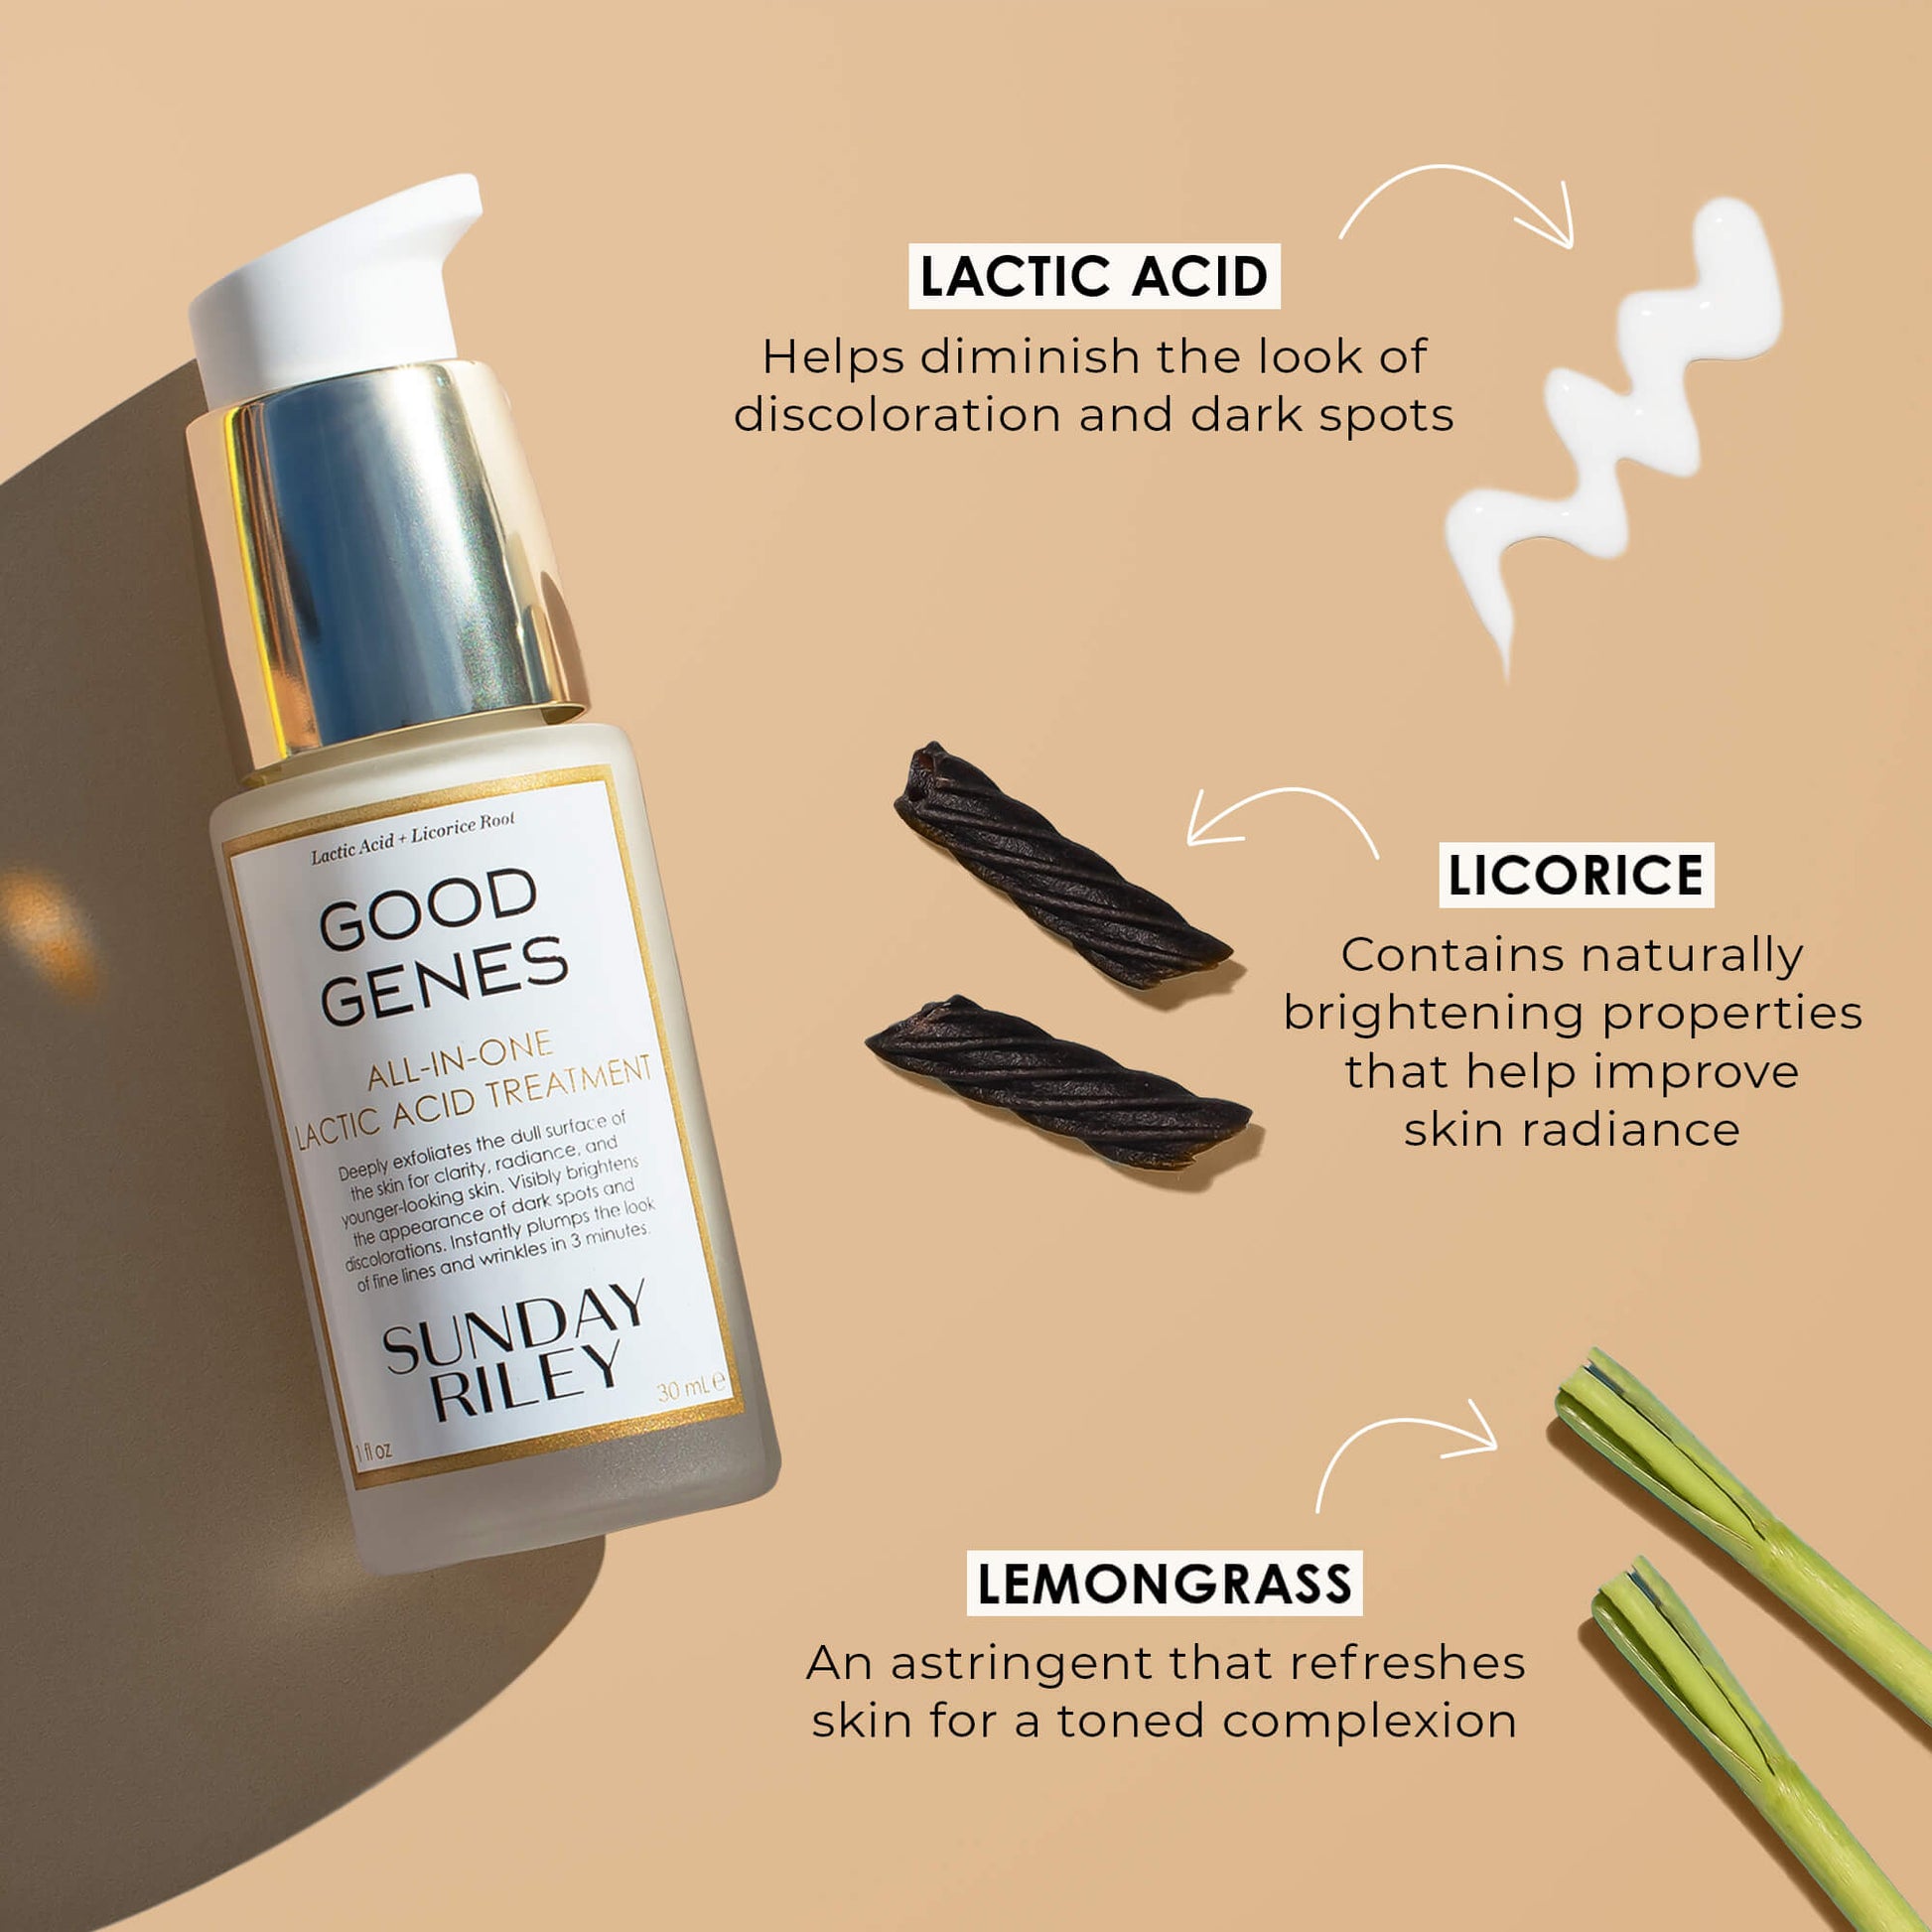 Good Genes key ingredients - LACTIC ACID: Helps diminish the look of discoloration and dark spots - LICORICE: Contains naturally brightening properties that help improve skin radiance - LEMONGRASS: An astringent that refreshes skin for a tones complexion